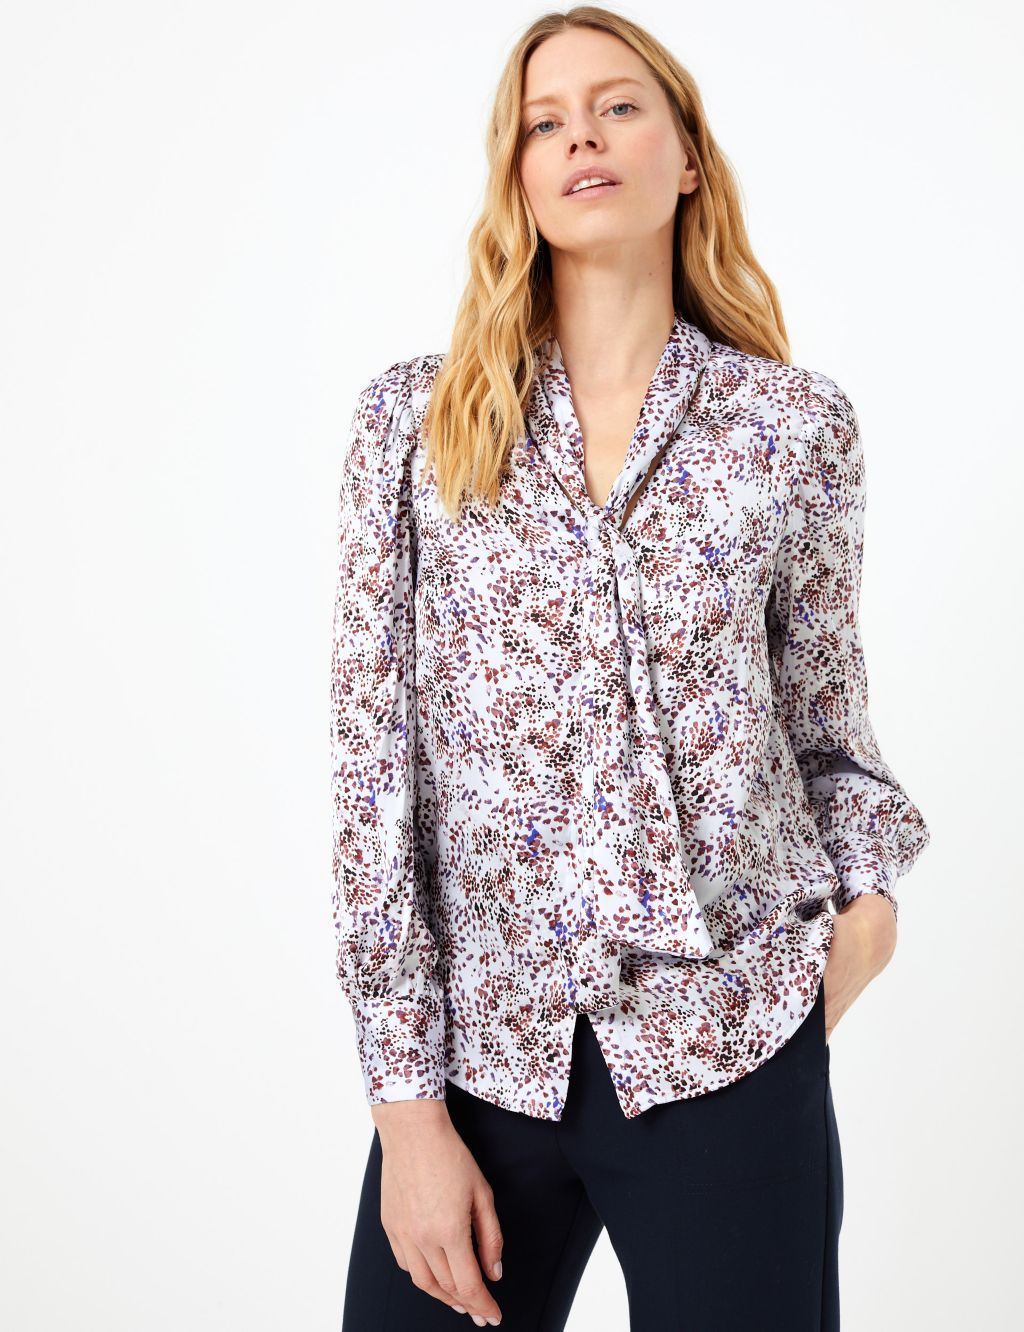 Satin Printed Blouse | M&S Collection | M&S